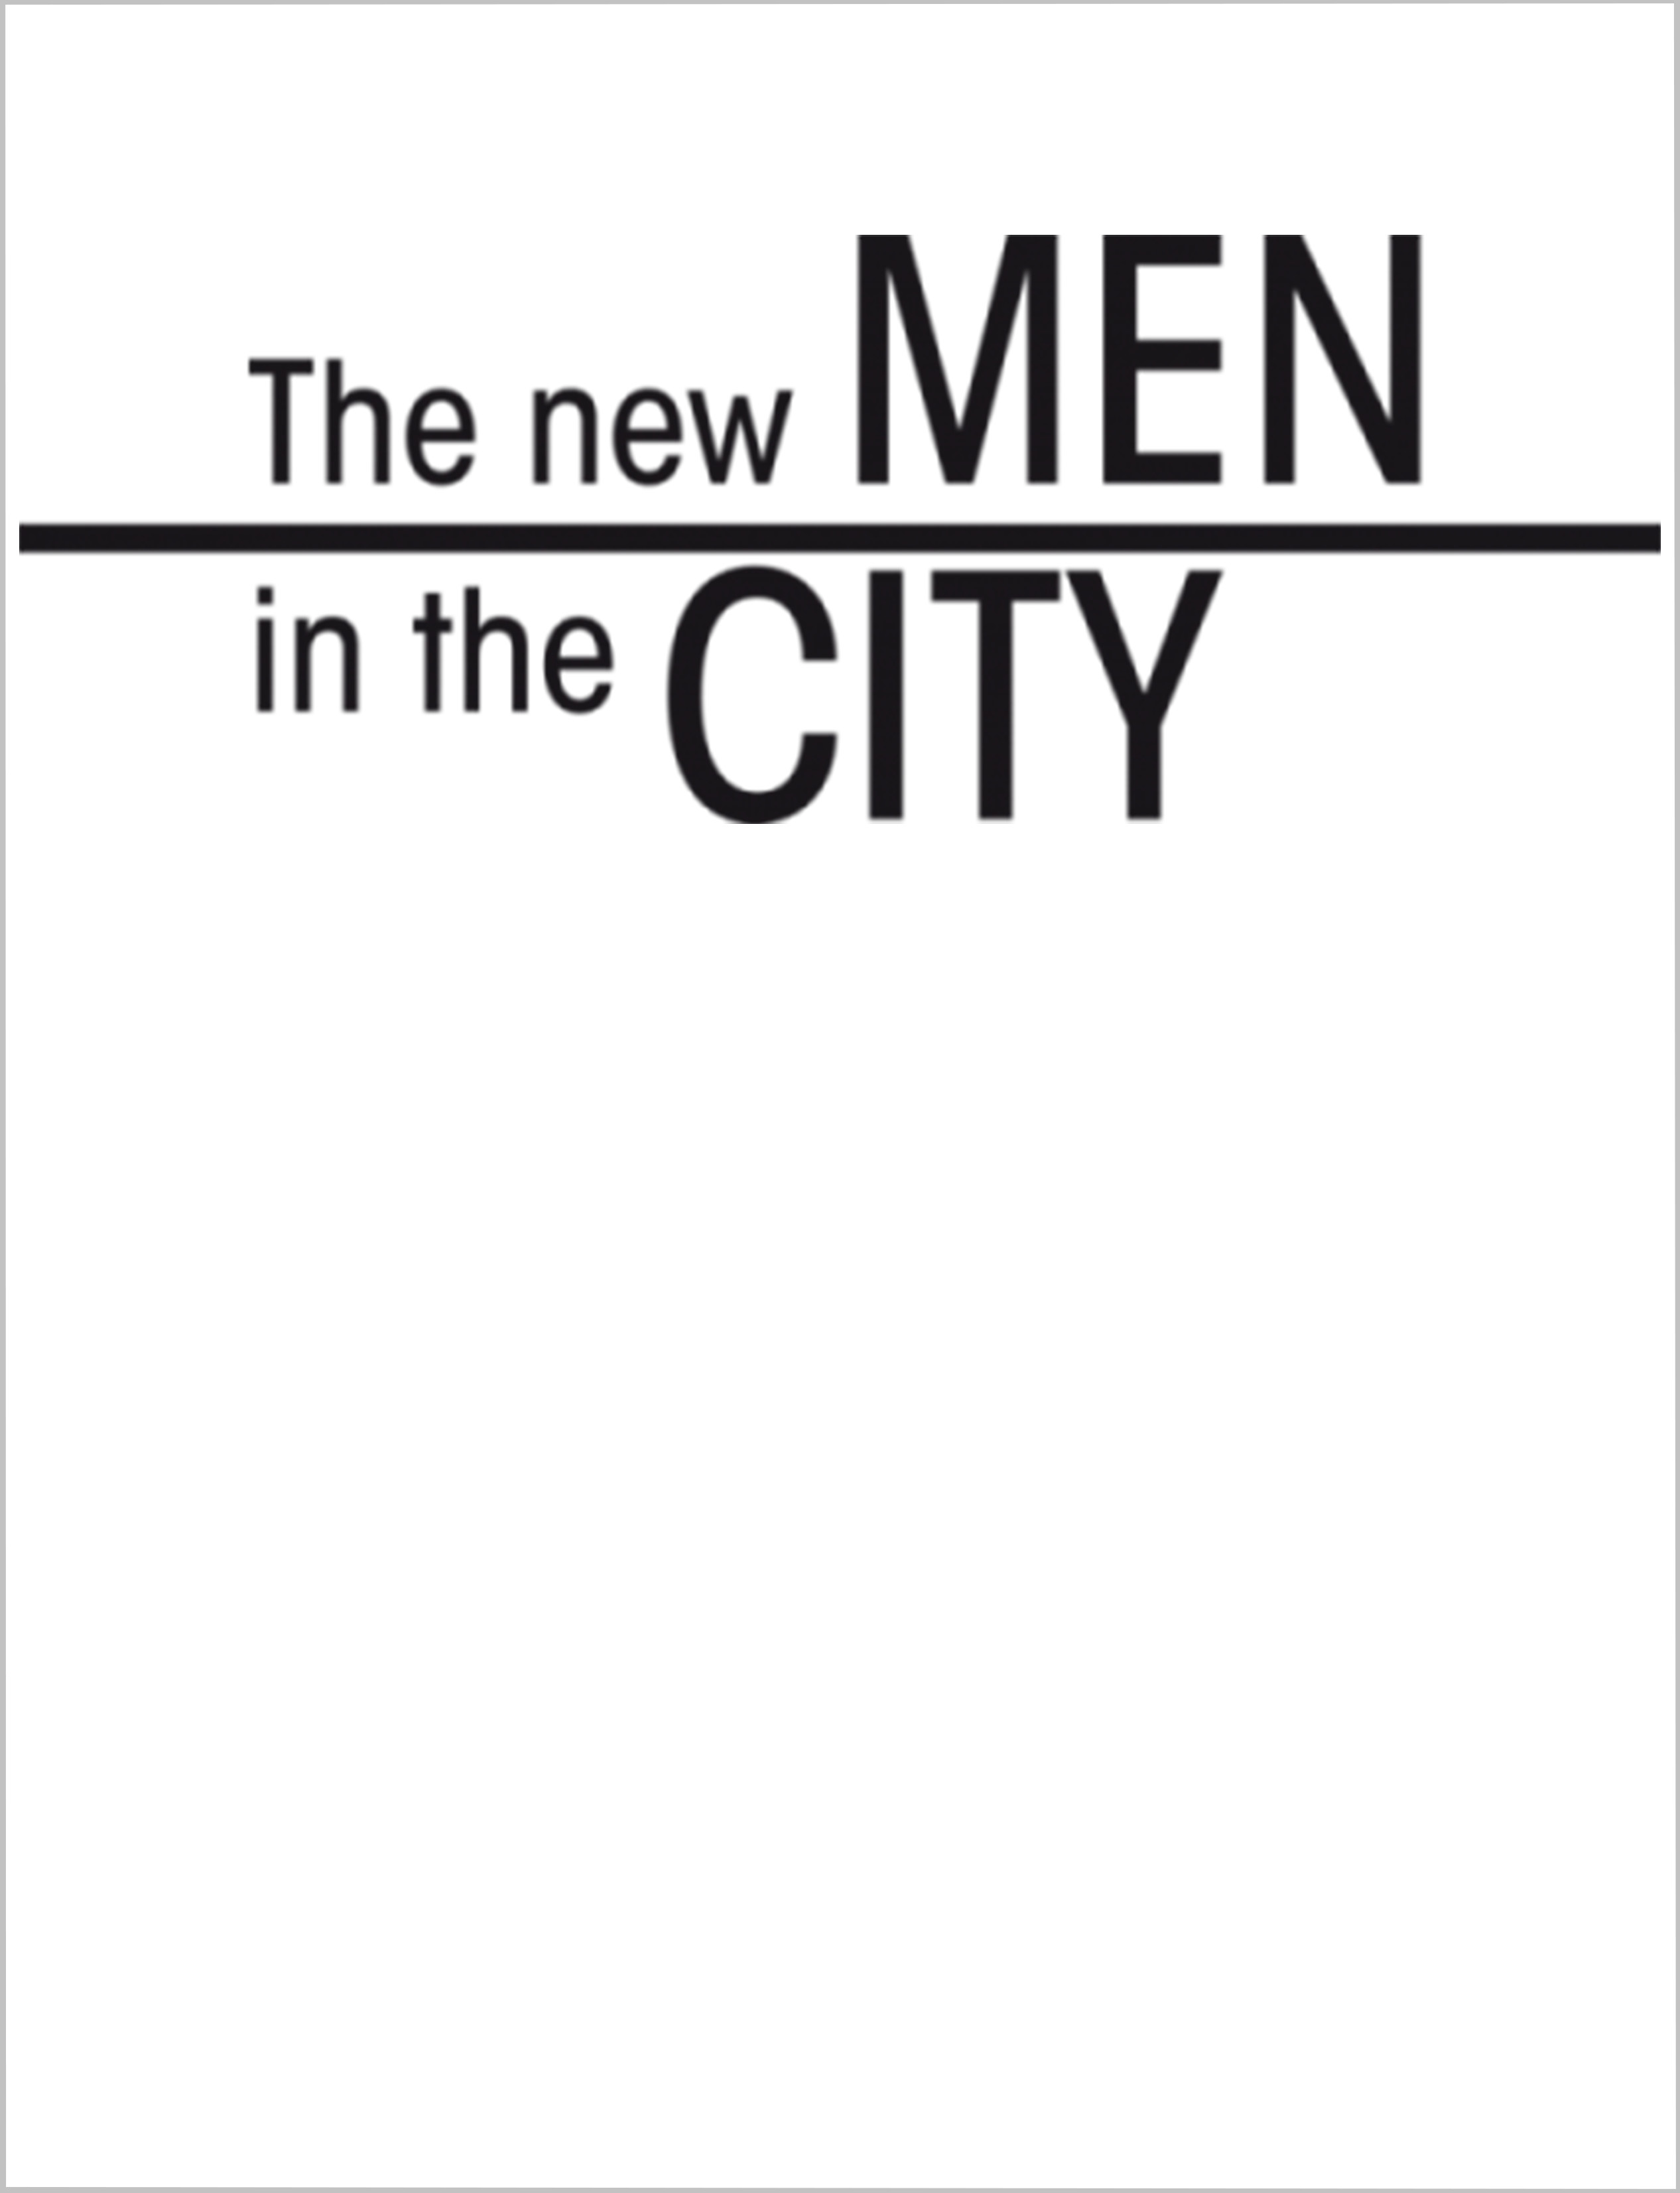 The new men of the city